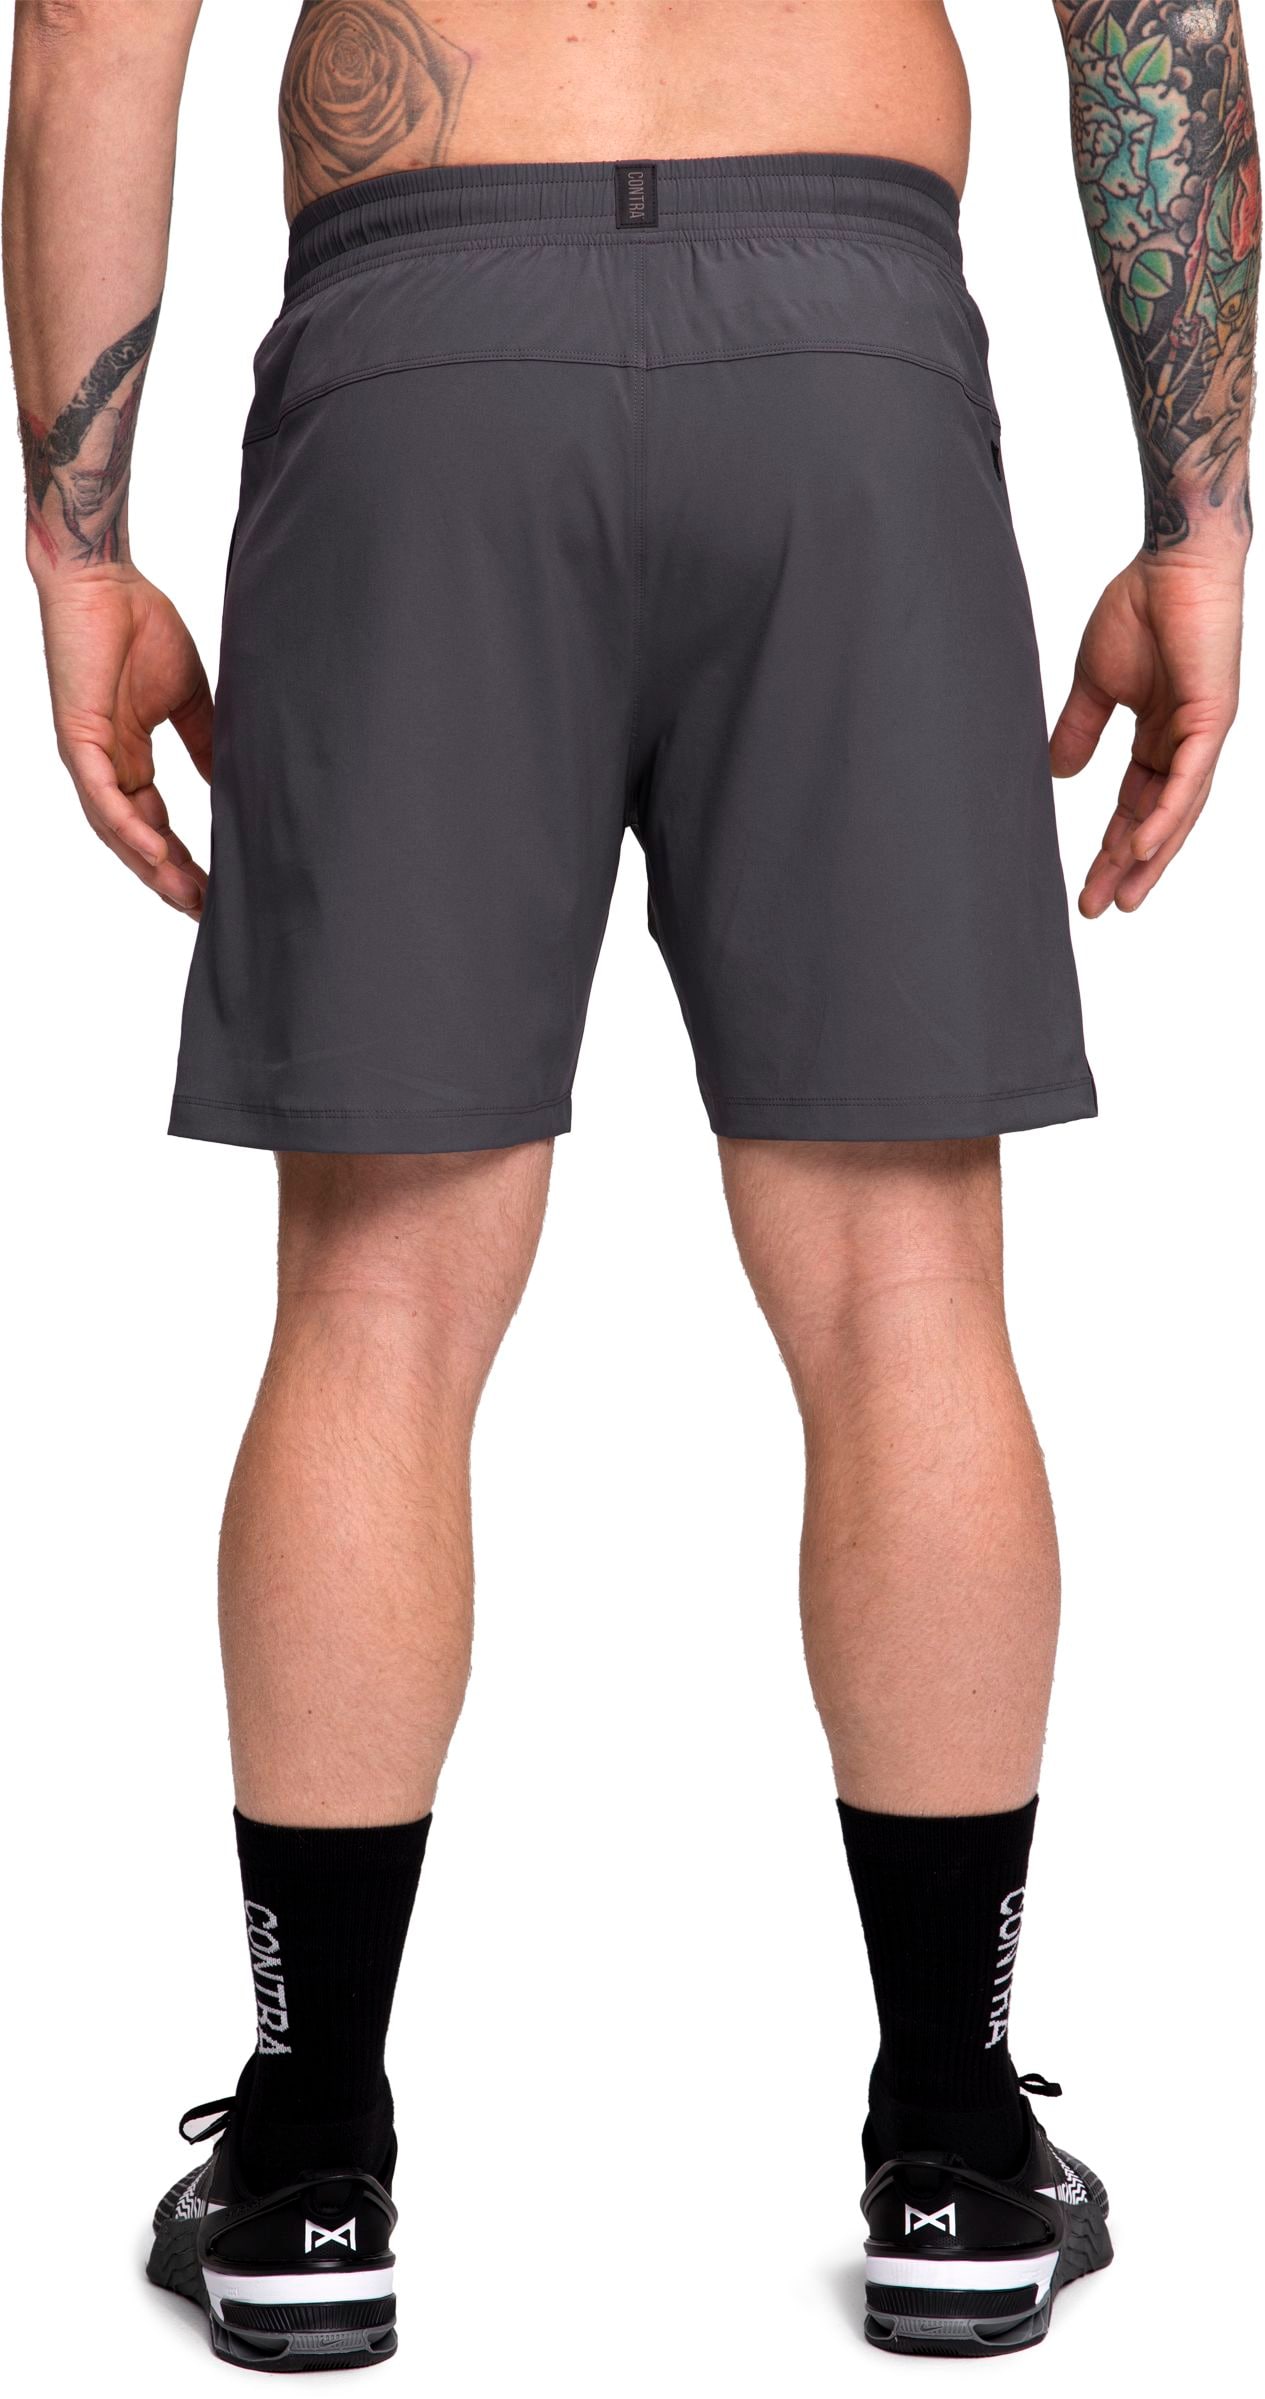 CONTRA, M OHS SHORTS